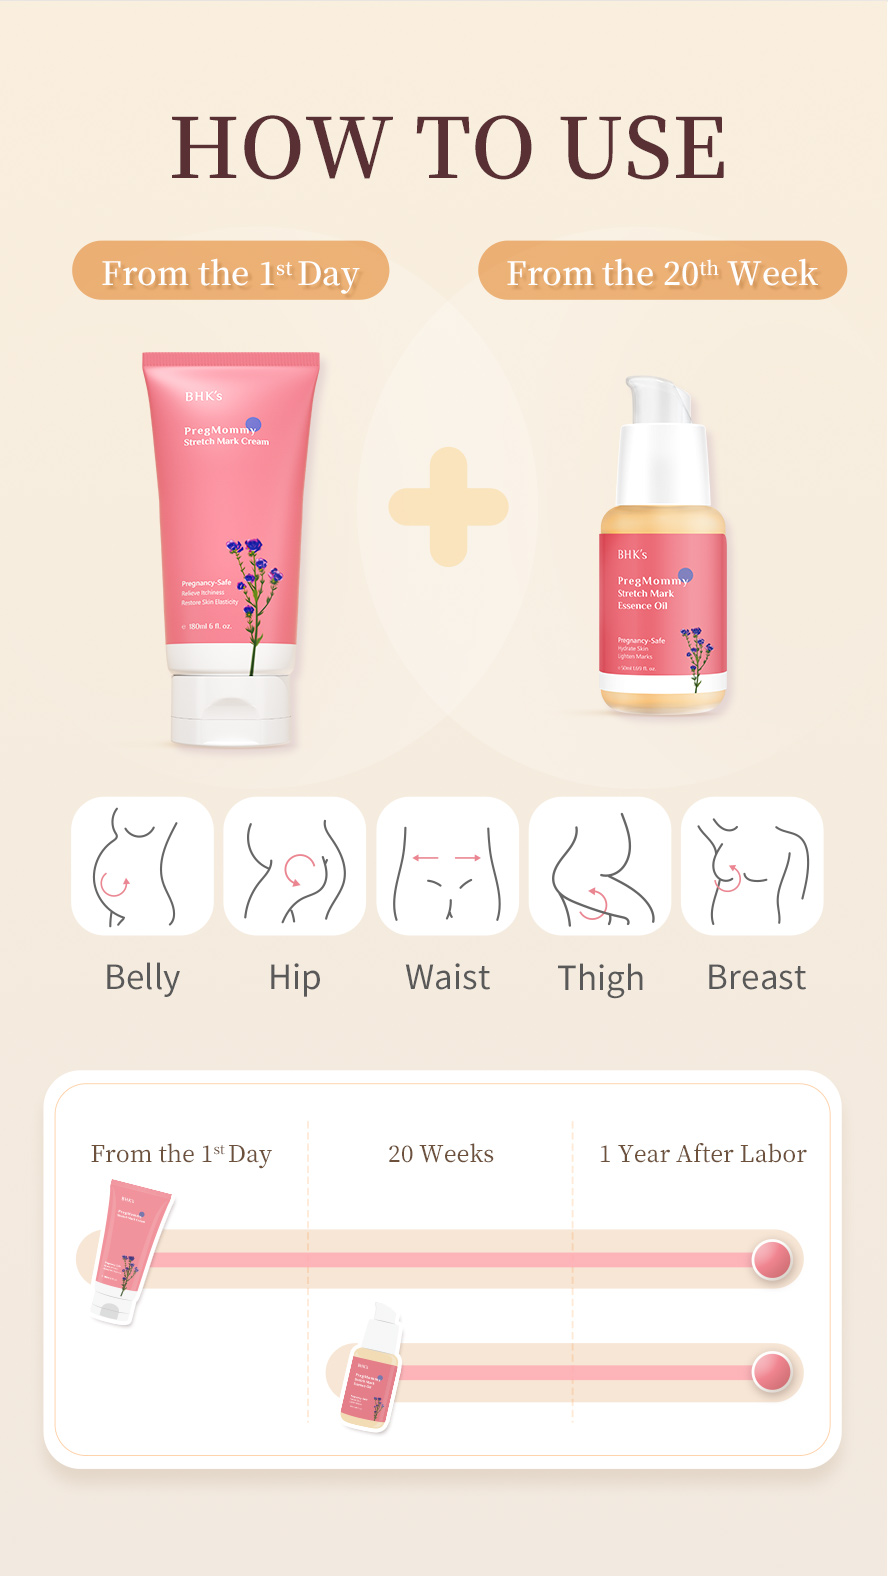 It can be used throughout the lpregnancy even after labor, apply it on several body parts that can easily get stretch marks and lines, such as belly, hip, waist, thigh and breast